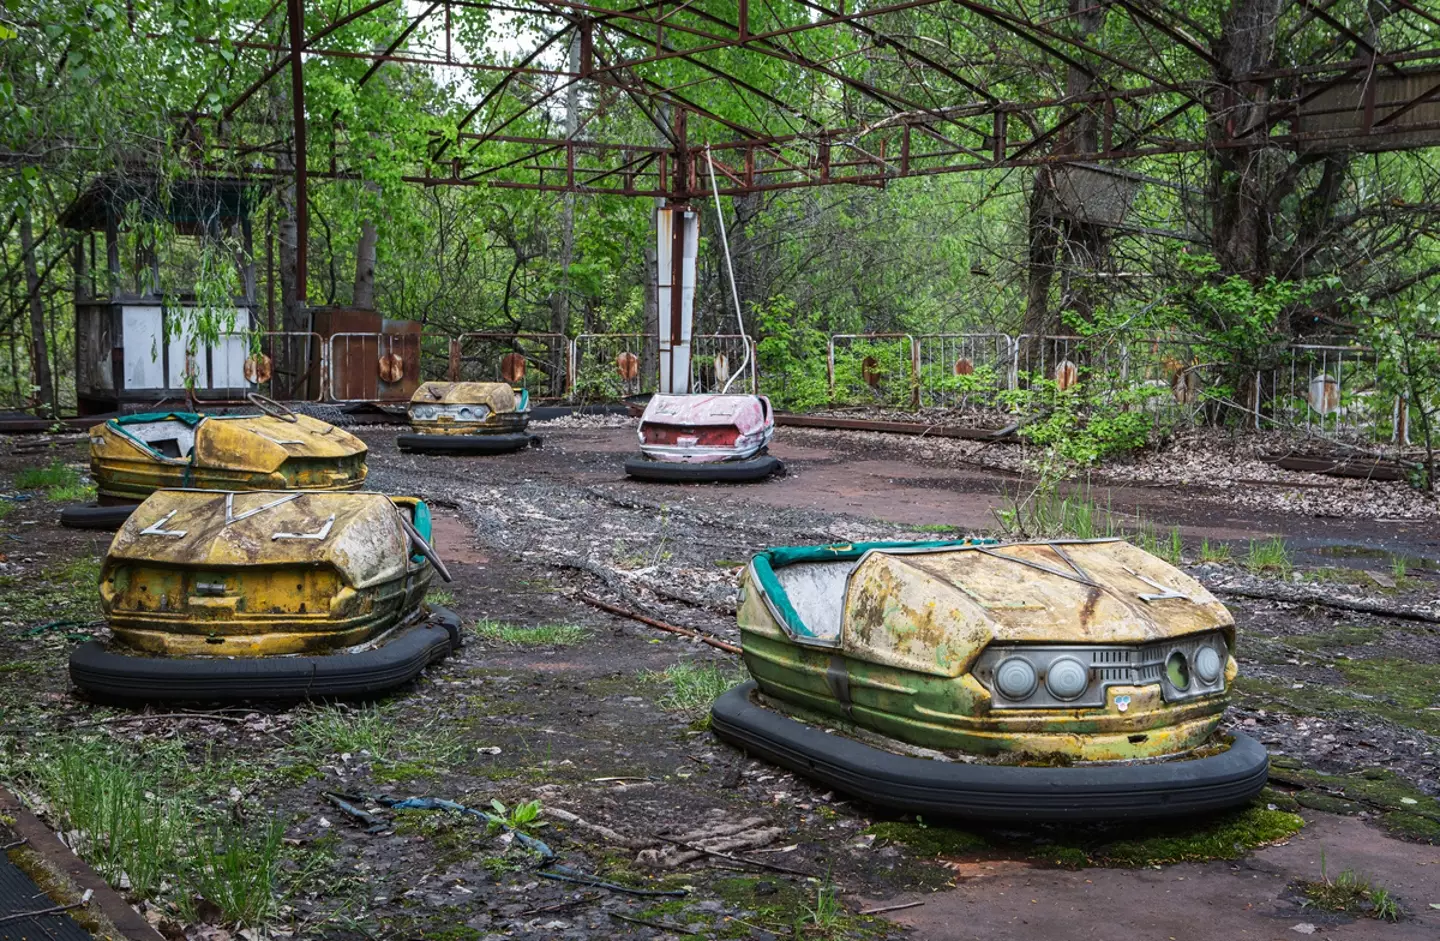 The never-used bumper cars.